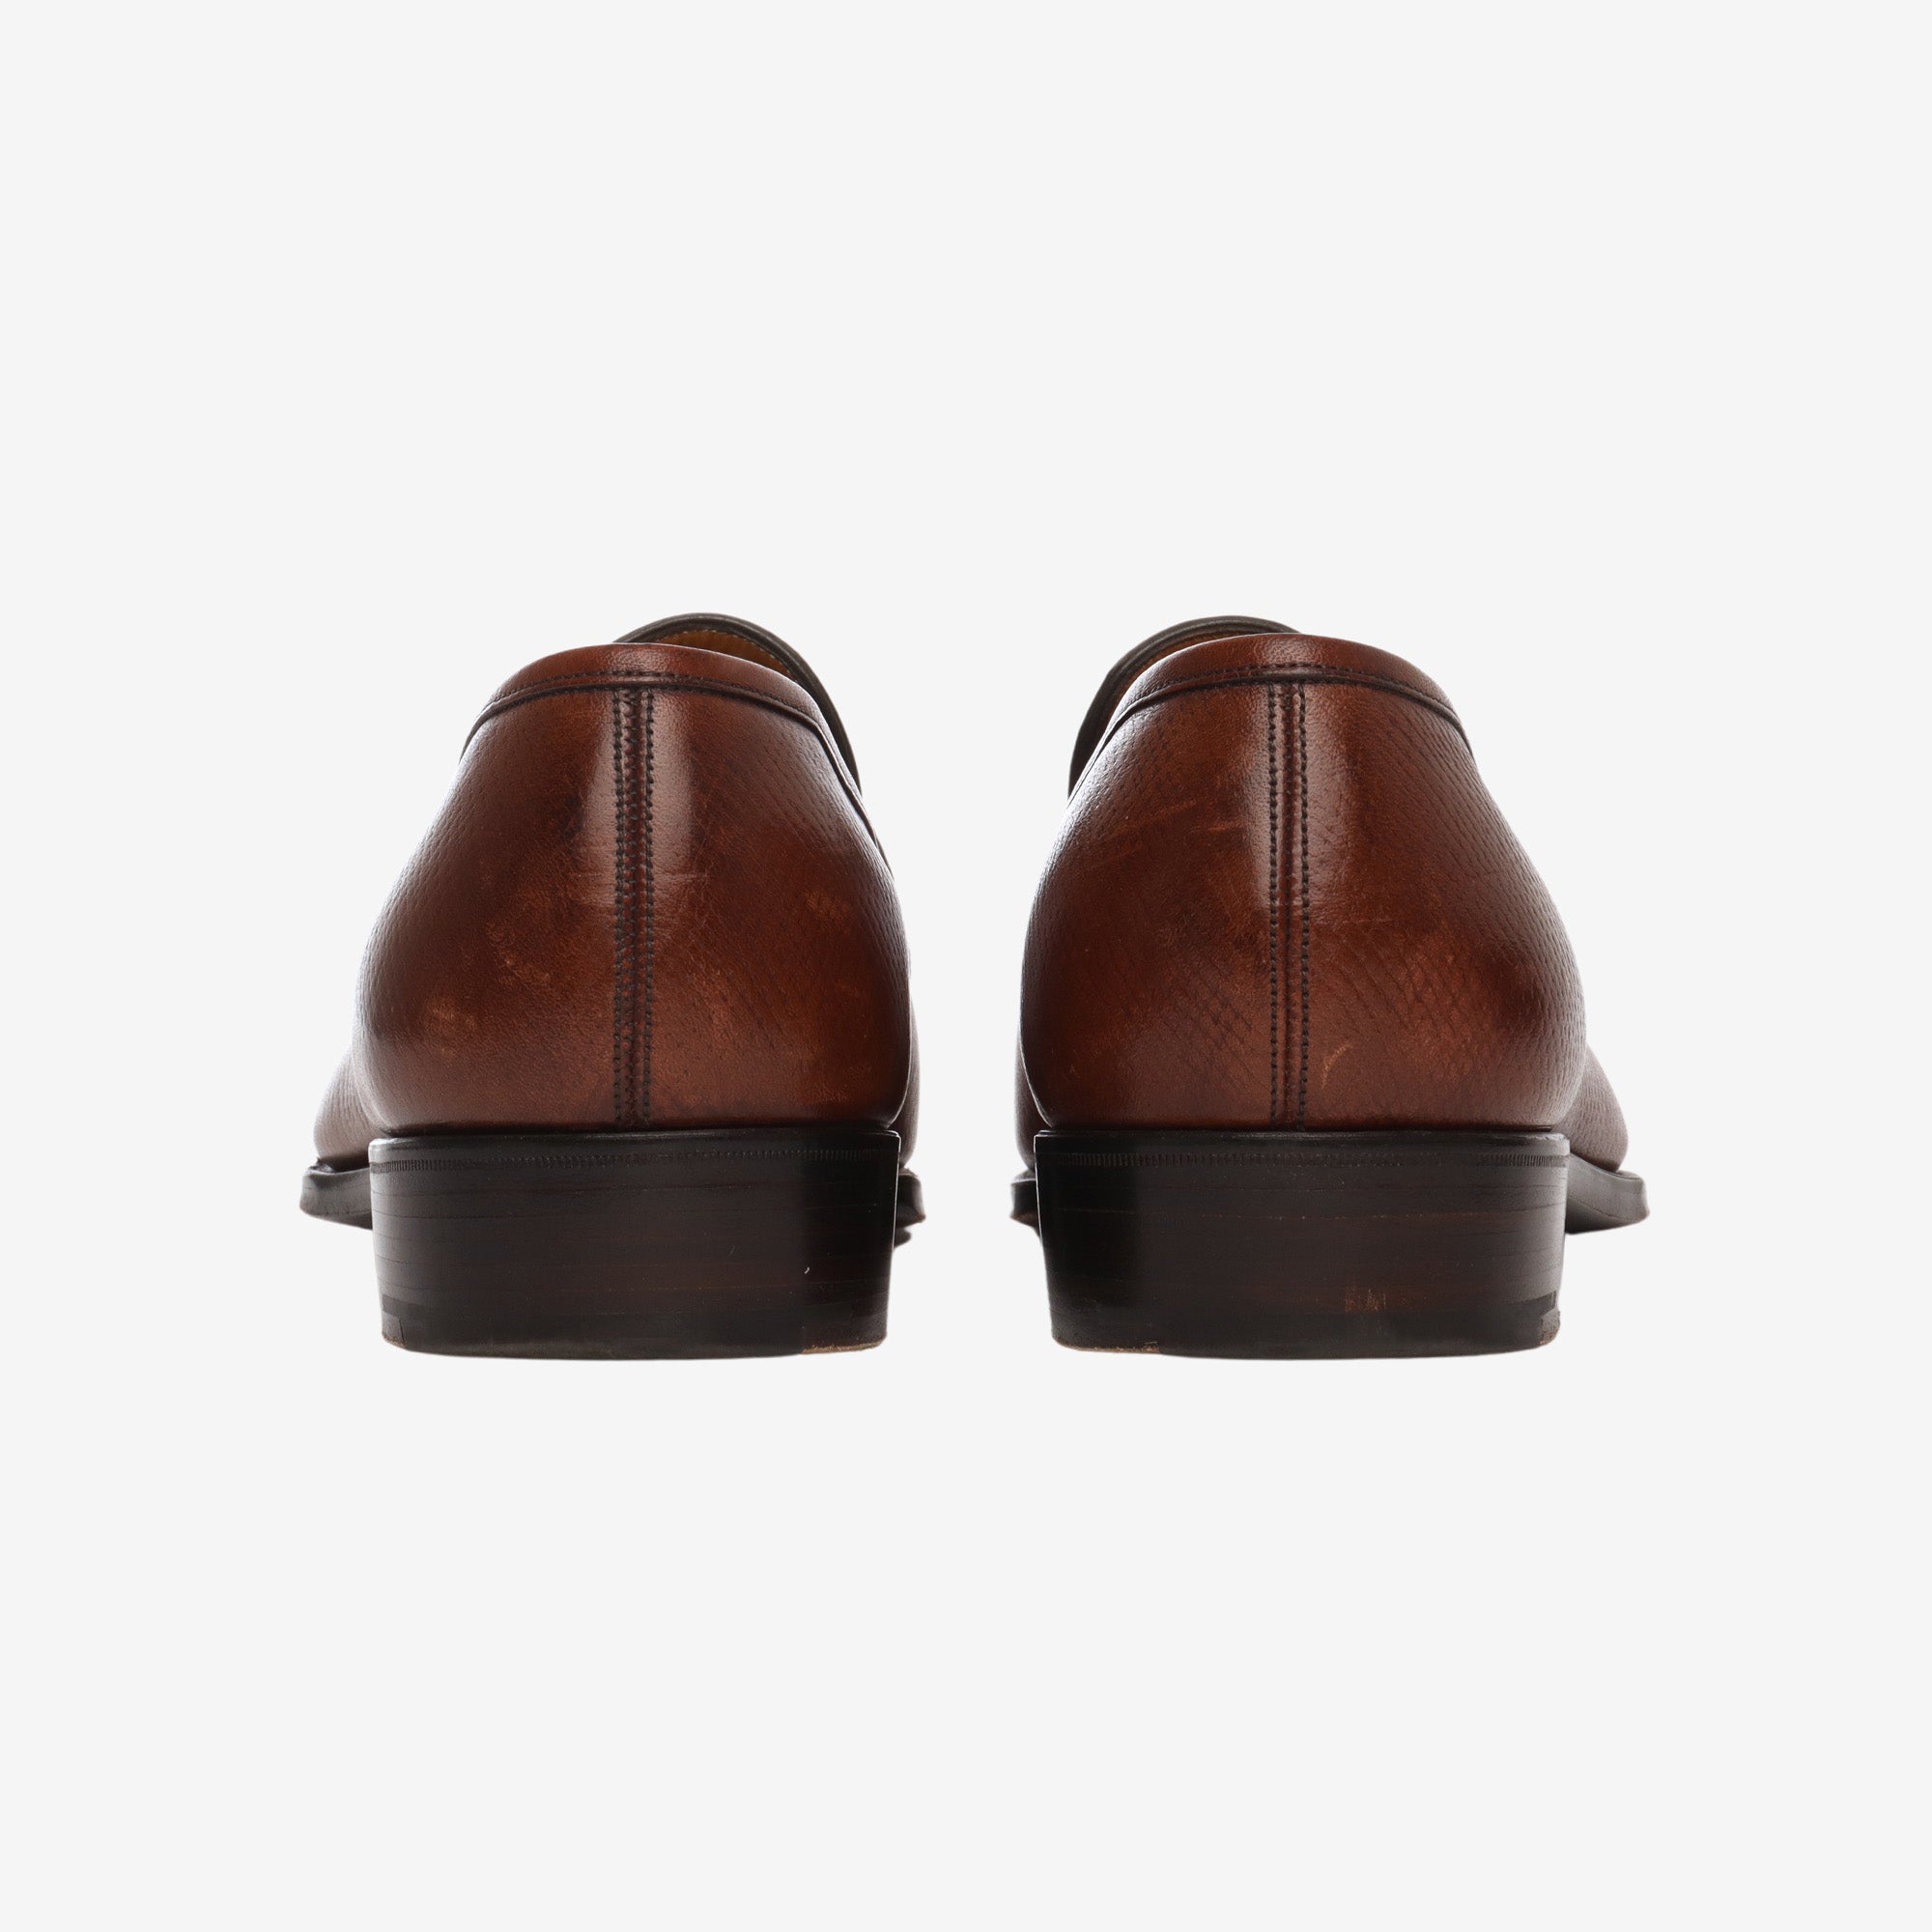 Crompton Loafer